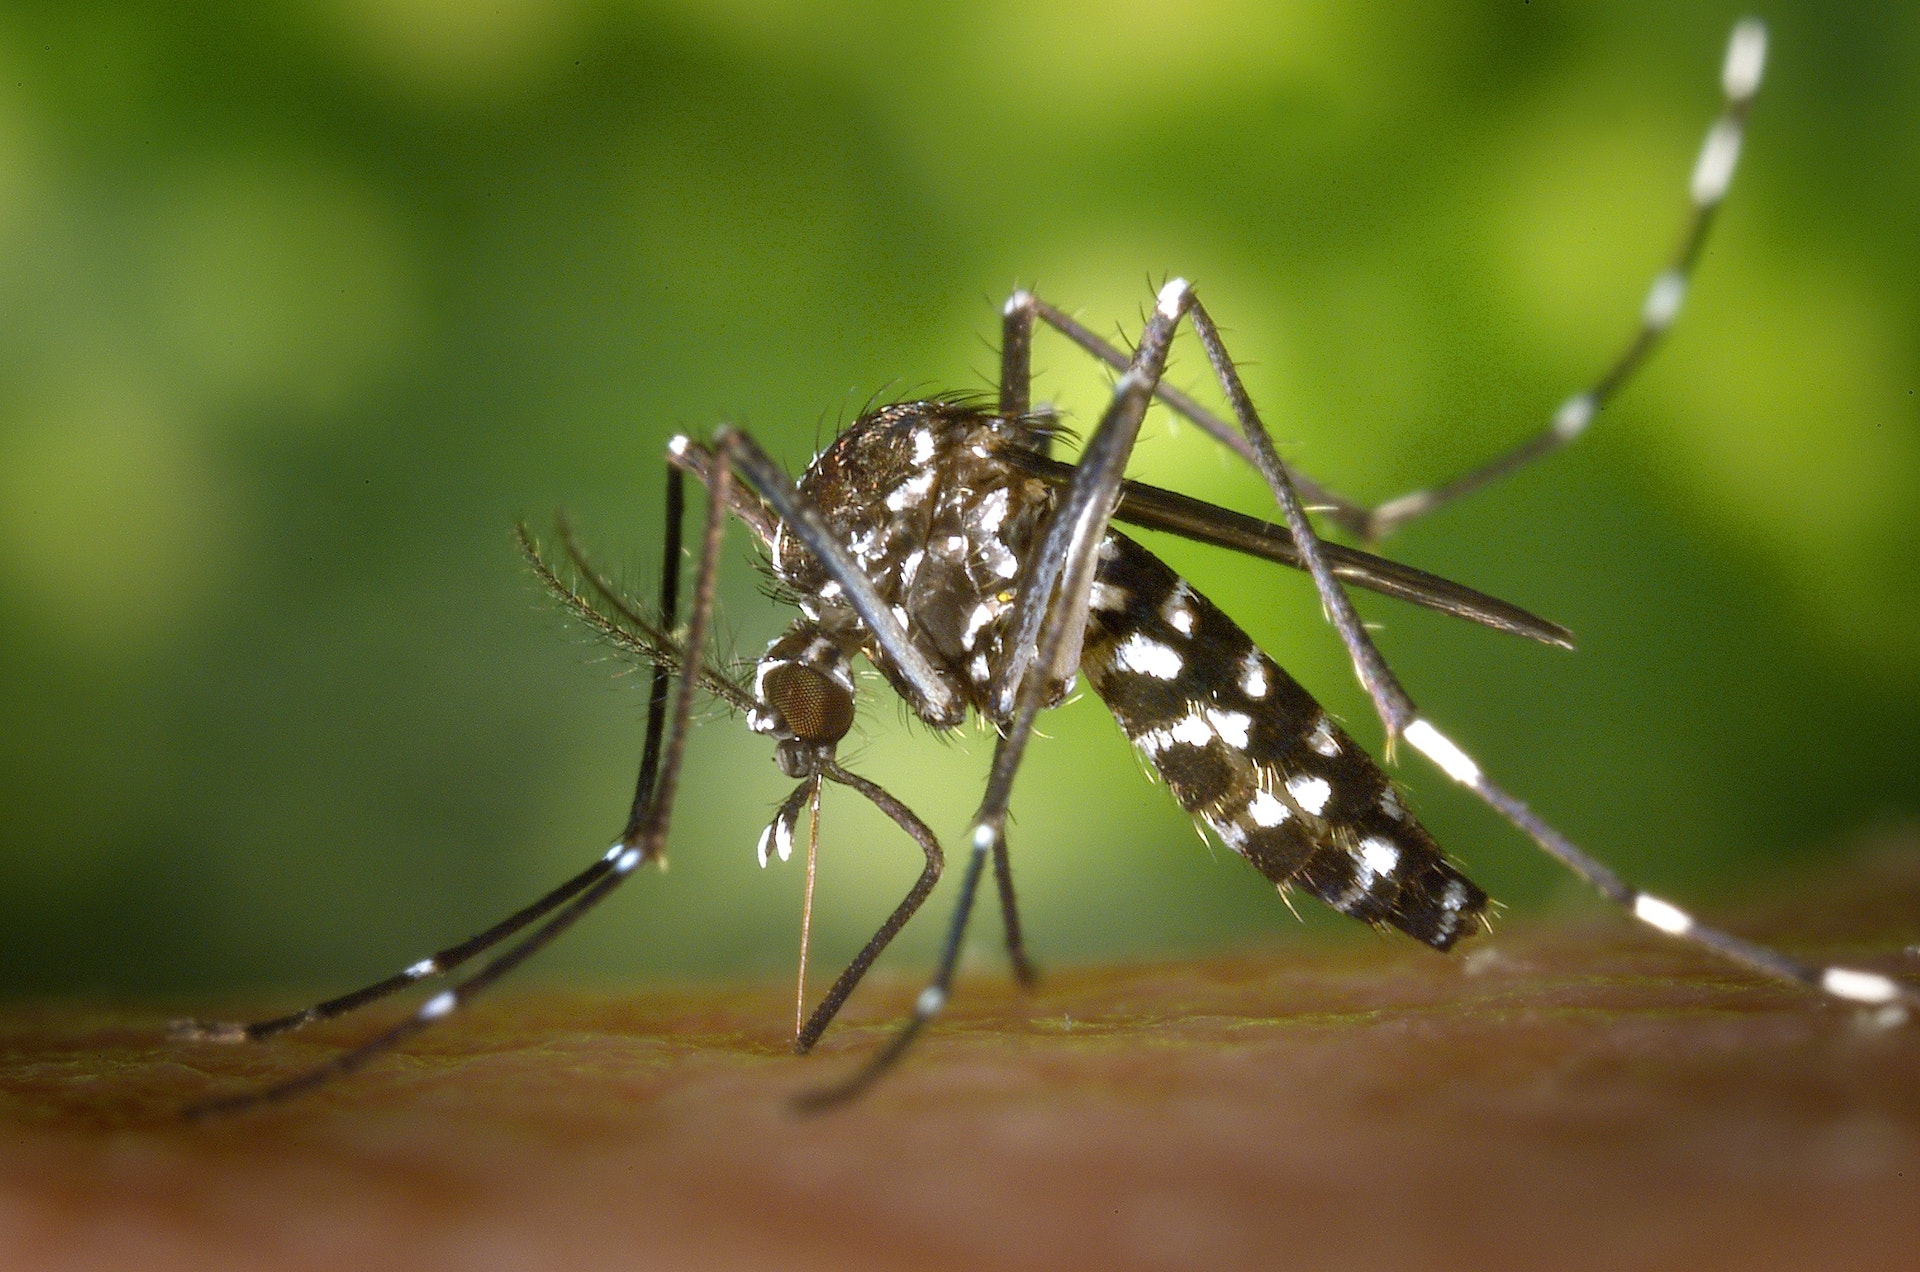 Cringy Fun Facts About Mosquitoes: The Only Thing More Annoying Than Your Mother-in-Law